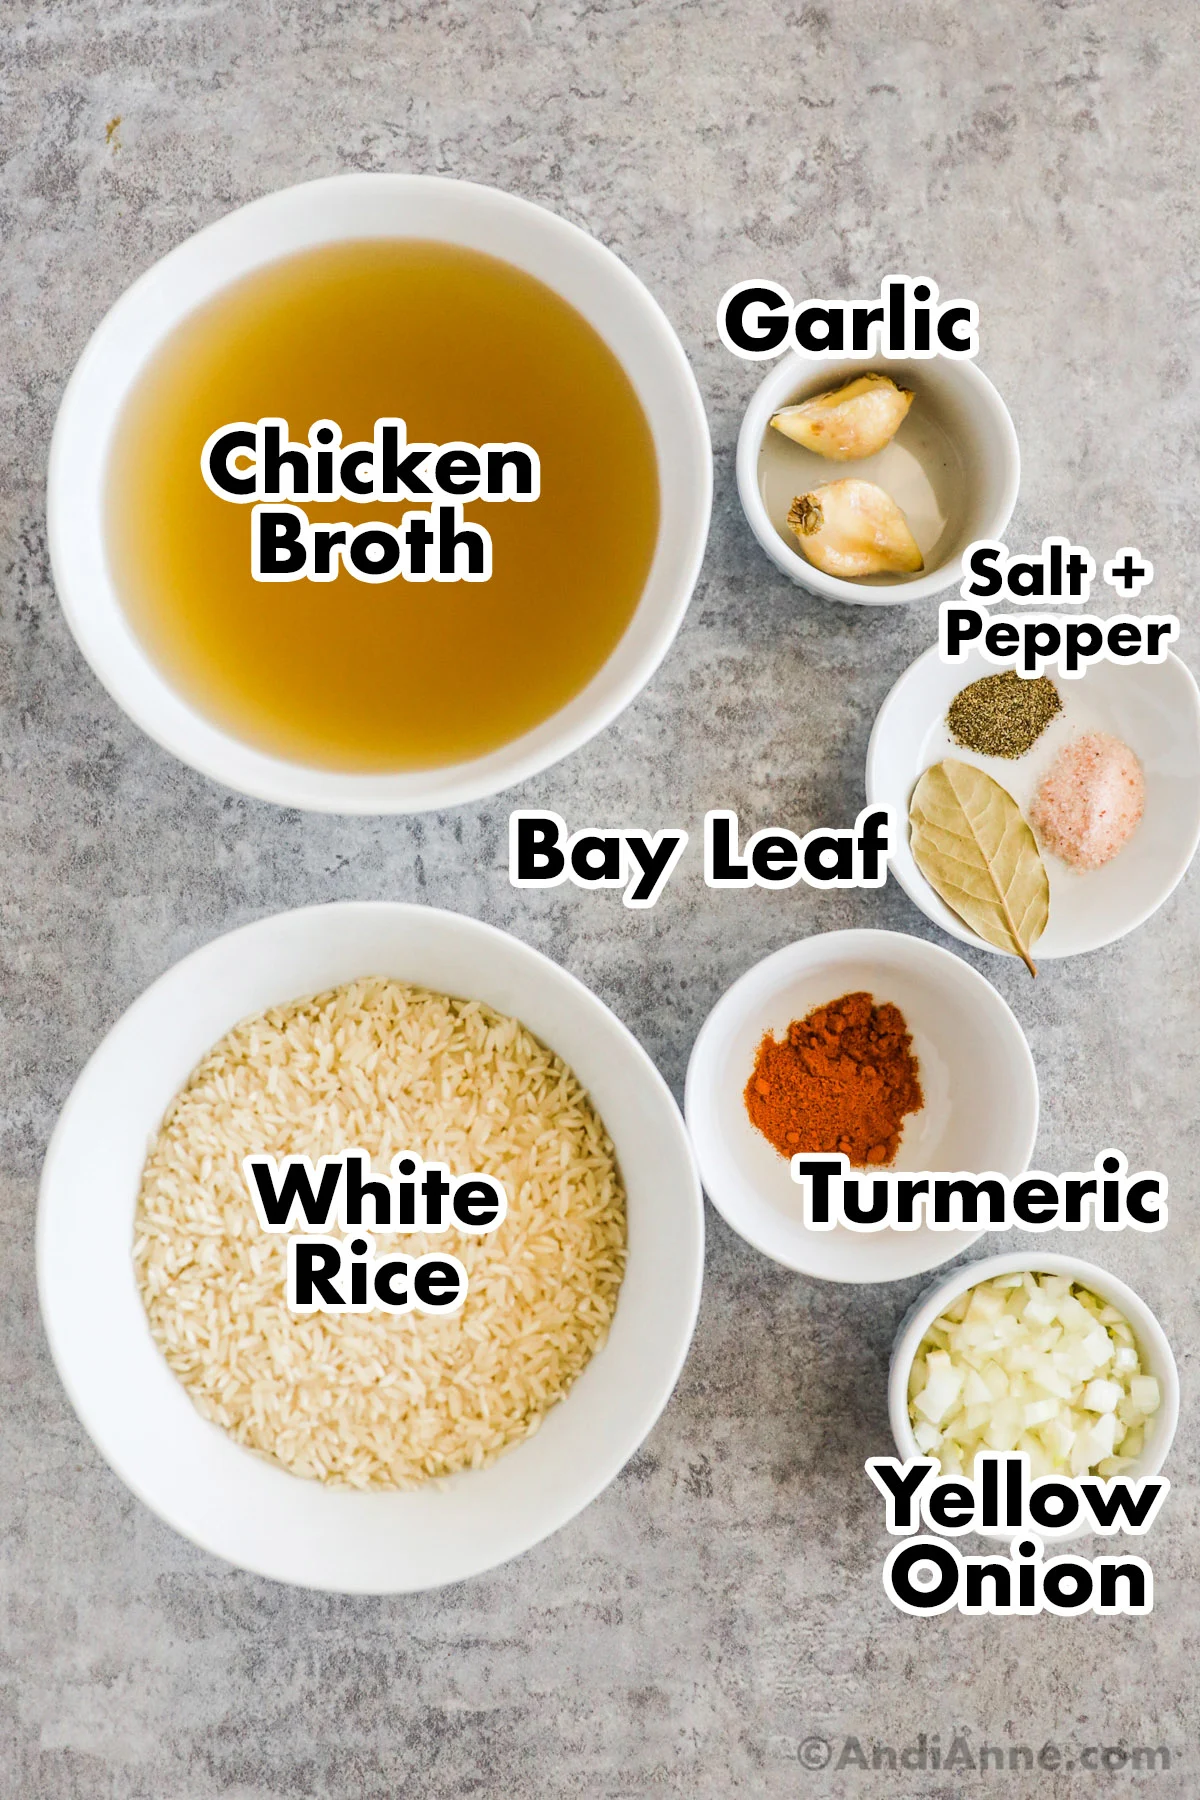 Recipe ingredients on the counter including bowl of chicken broth, bowls of uncooked rice, garlic cloves, and spices.